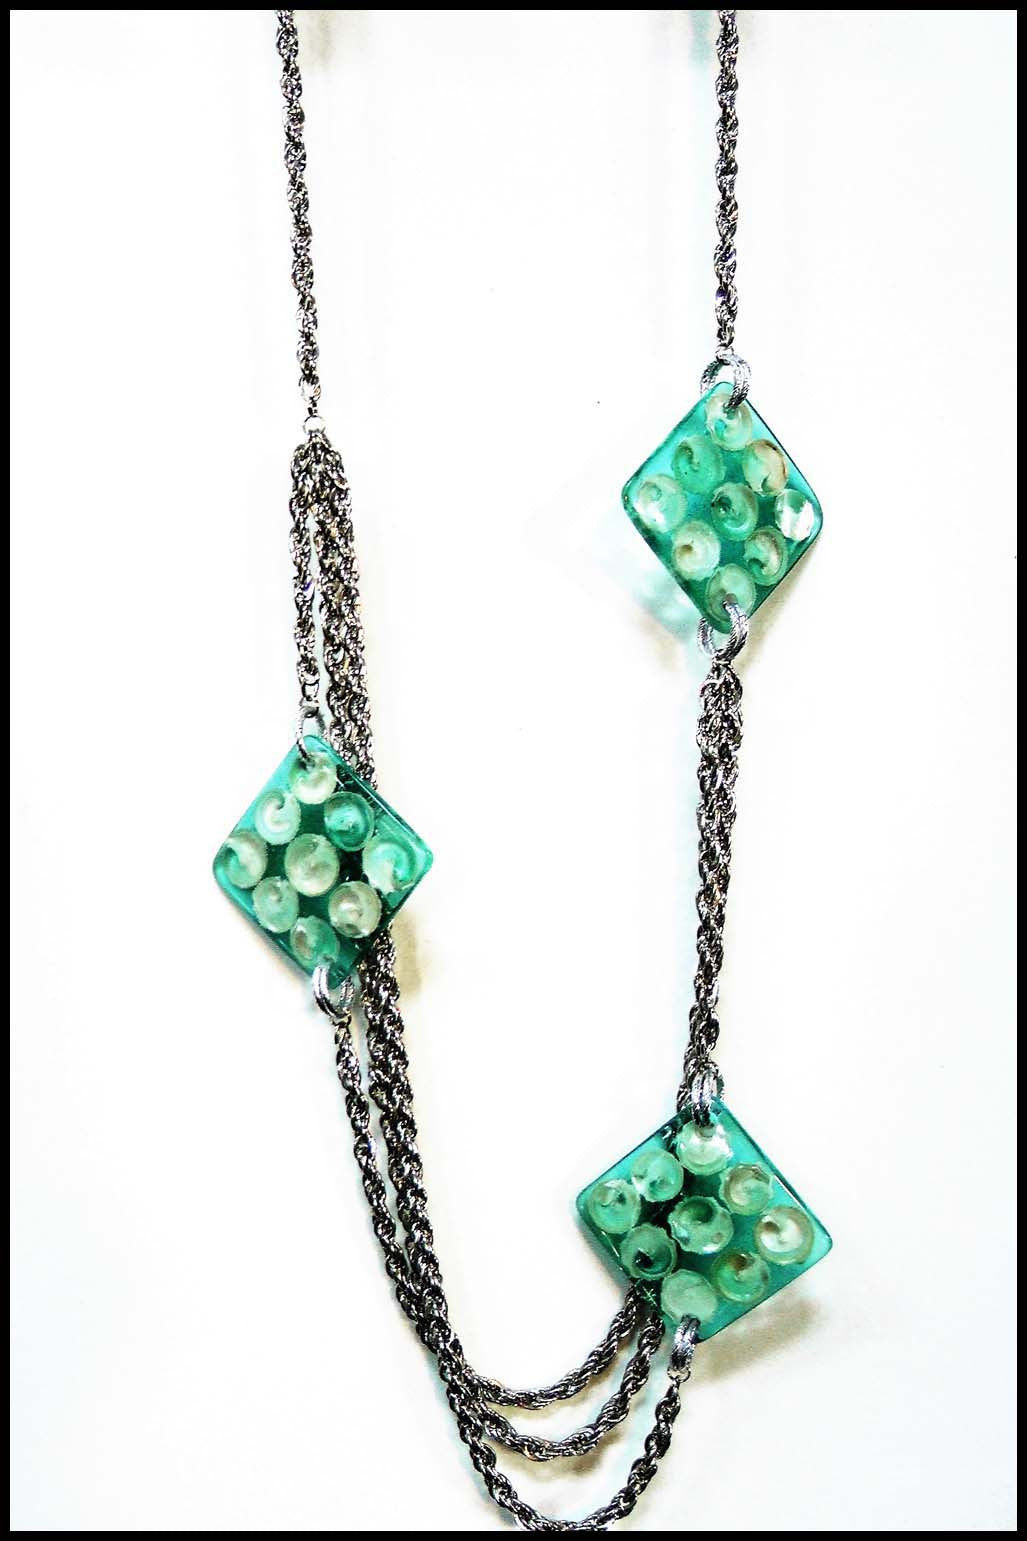 Offset Square Bead Necklace